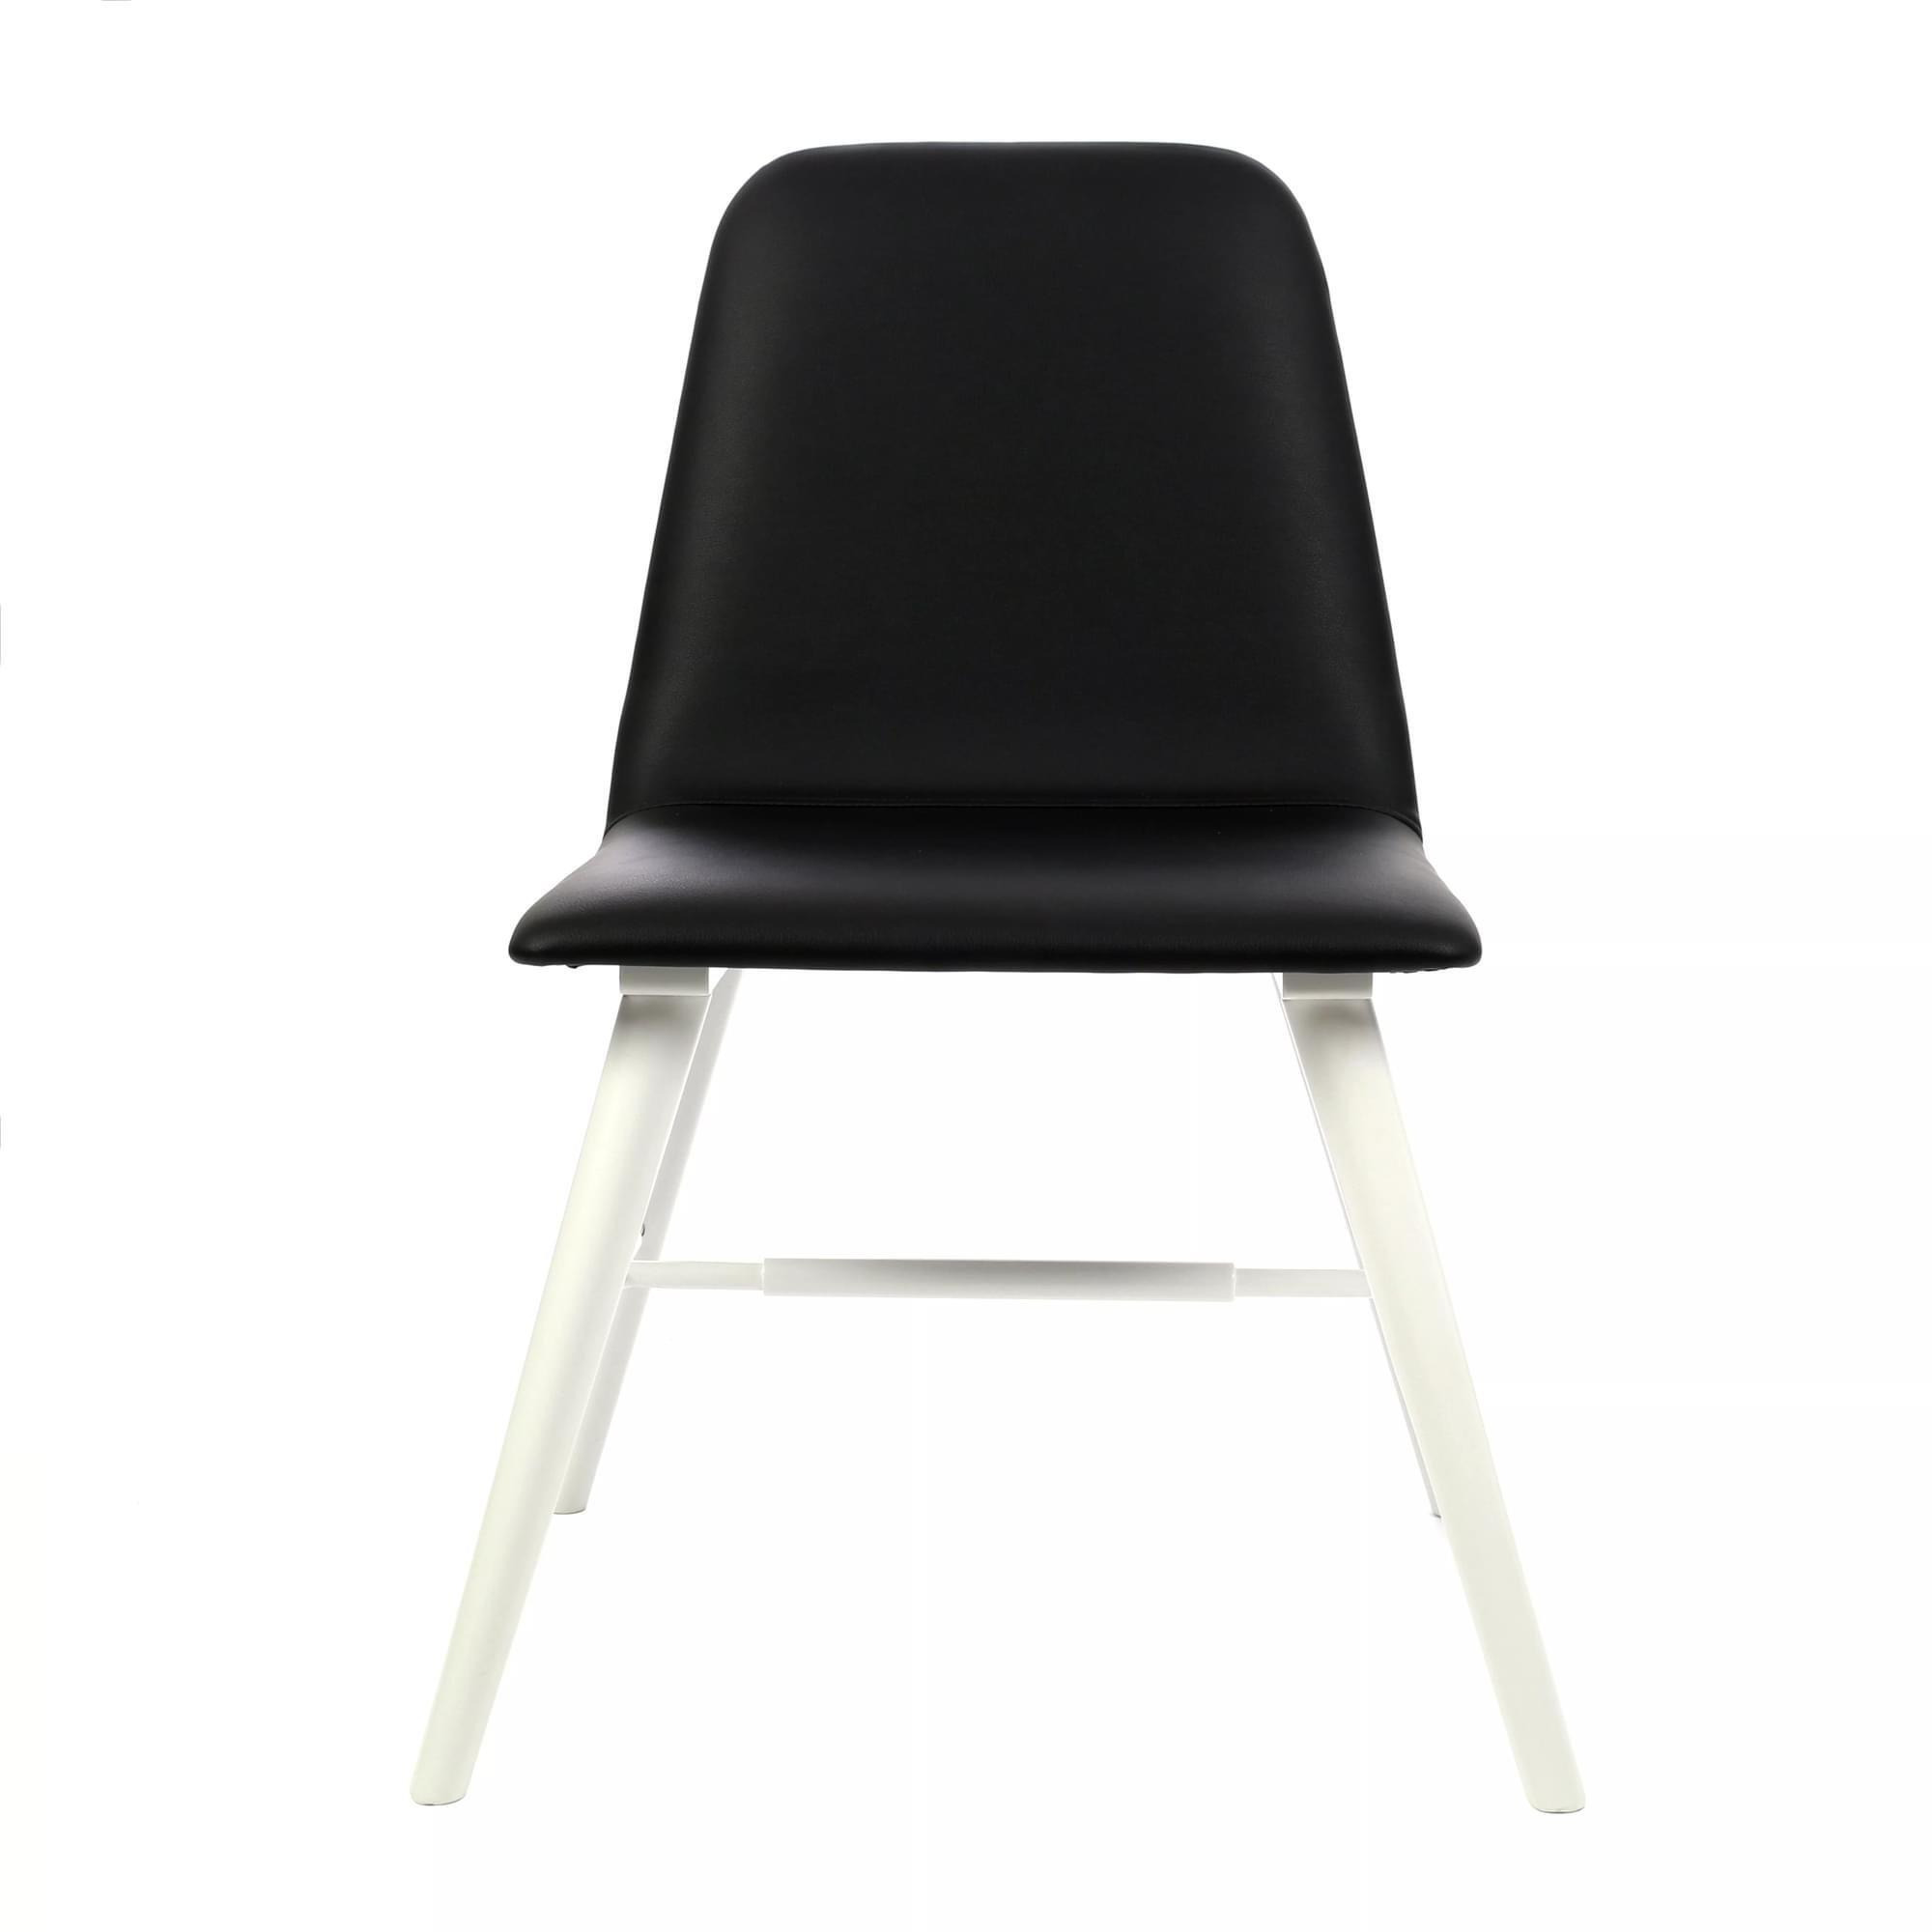 Interiors by Premier Black Leather Effect Dining Chair With White Legs - image 1